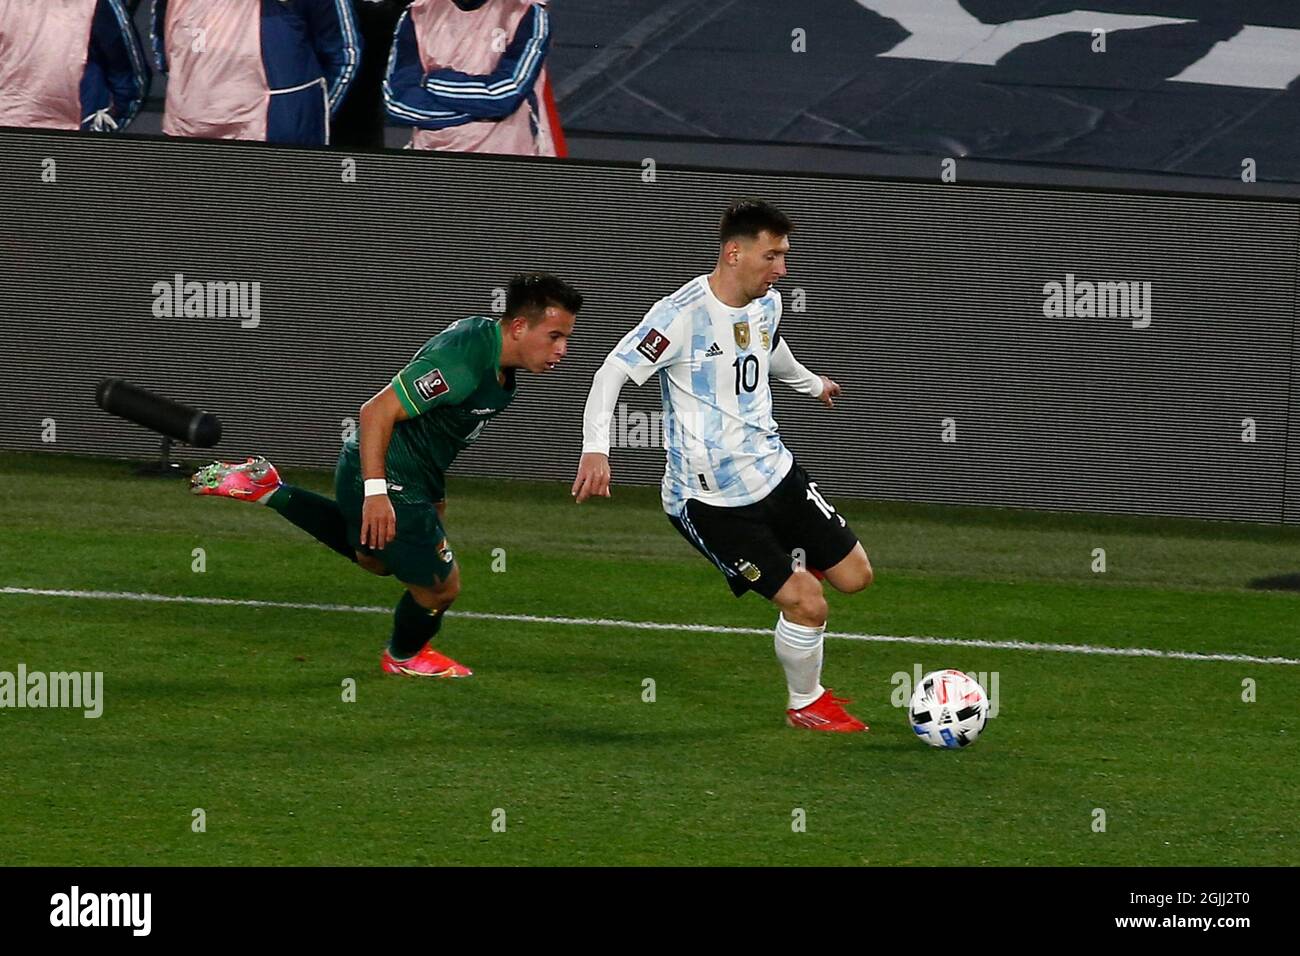 Buenos Aires, Argentina. 09th Sep, 2021. BUENOS AIRES - SEPTEMBER 9: Forward Lionel Messi (10) of Argentina controls the ball during a match between Argentina and Bolivia as part of South American Qualifiers for Qatar 2022 at Estadio Monumental Antonio Vespucio Liberti on September 9, 2021 in Buenos Aires, Argentina. (Photo by Florencia Tan Jun/PxImages) Credit: Px Images/Alamy Live News Stock Photo